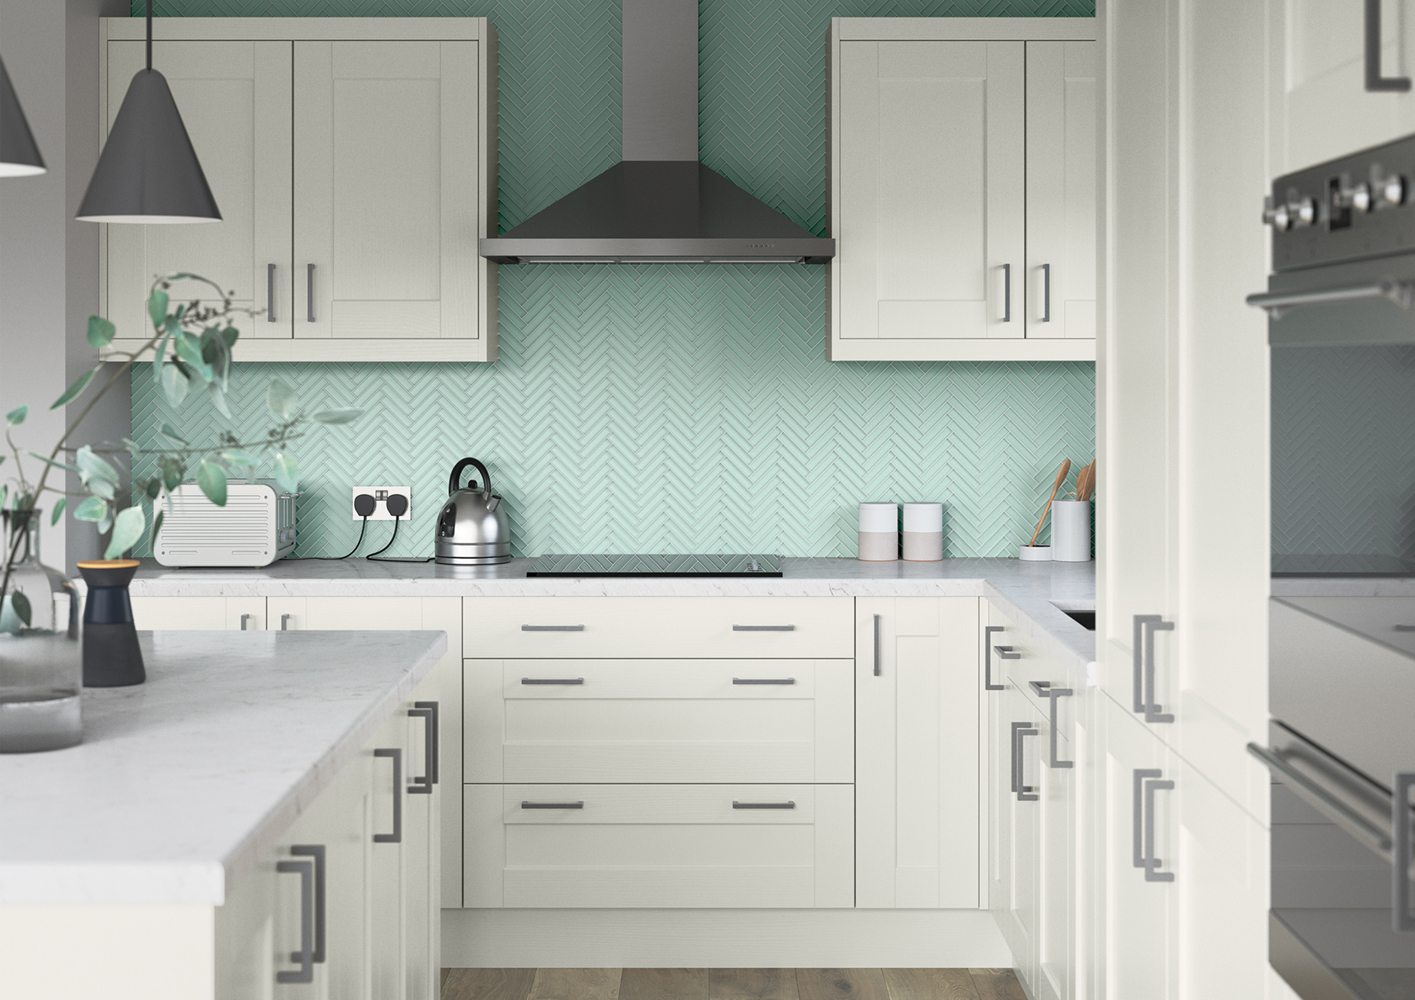 Kendal in Porcelain kitchen cabinets and drawers with oven, made by The Kitchen Depot